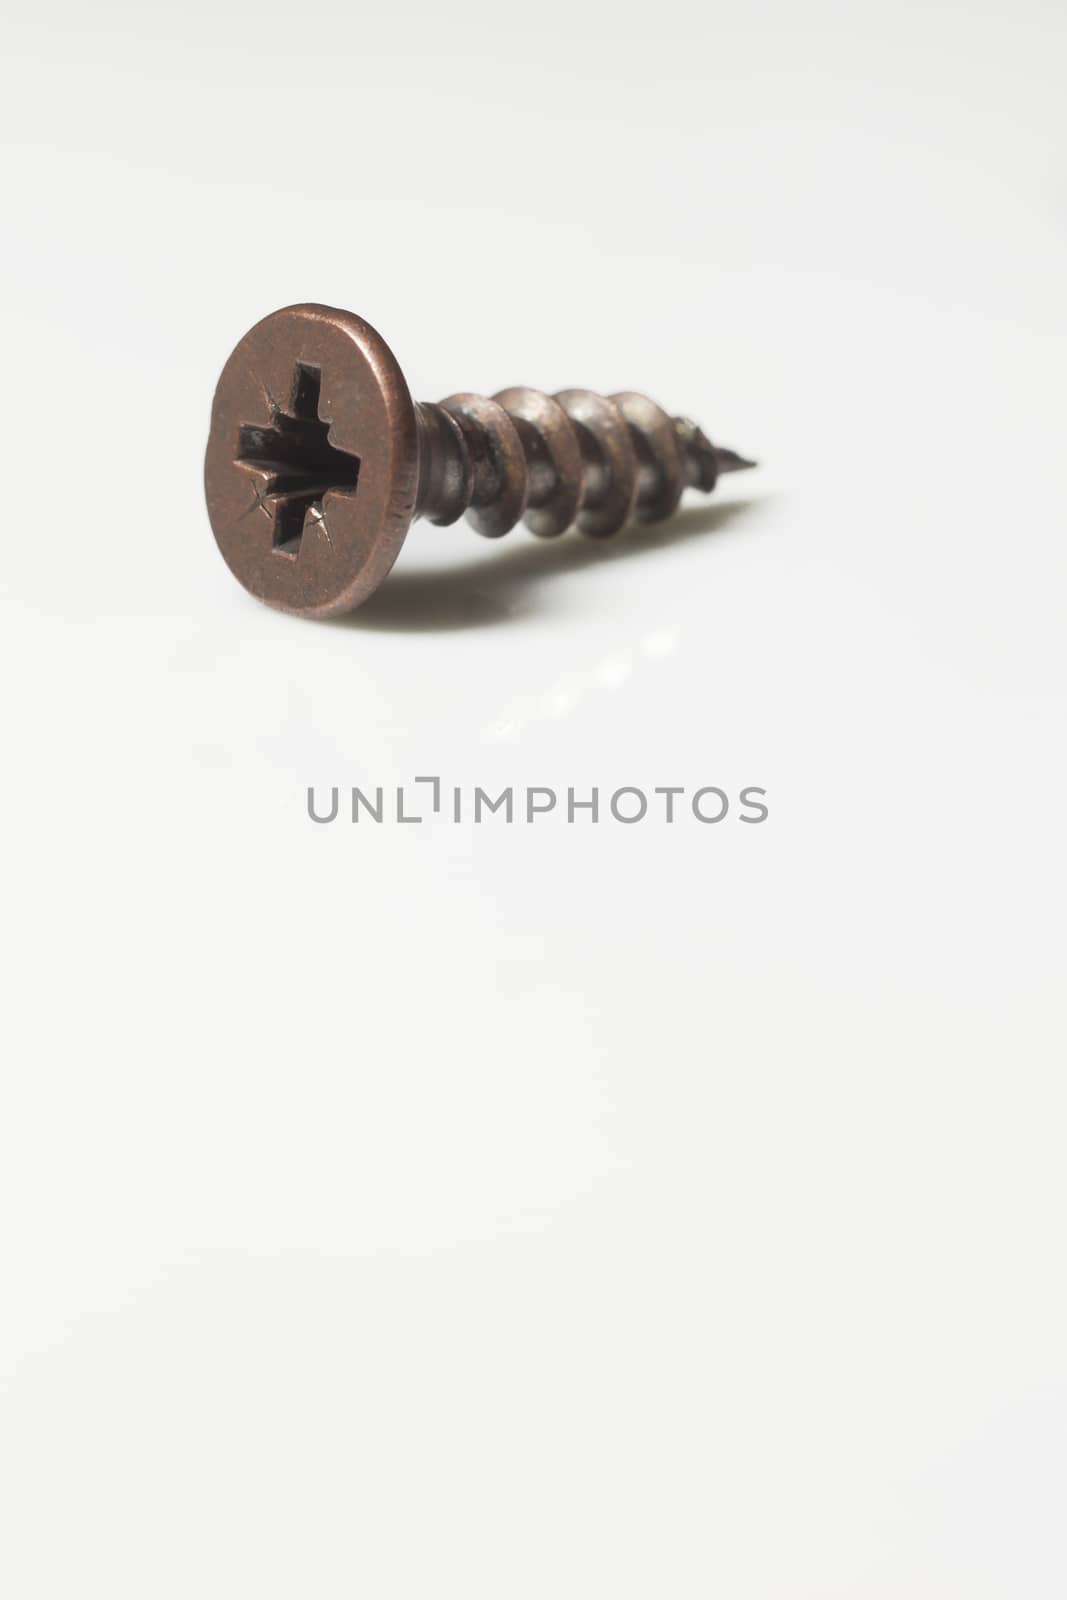 Screw on white background - industrial concept by mailos